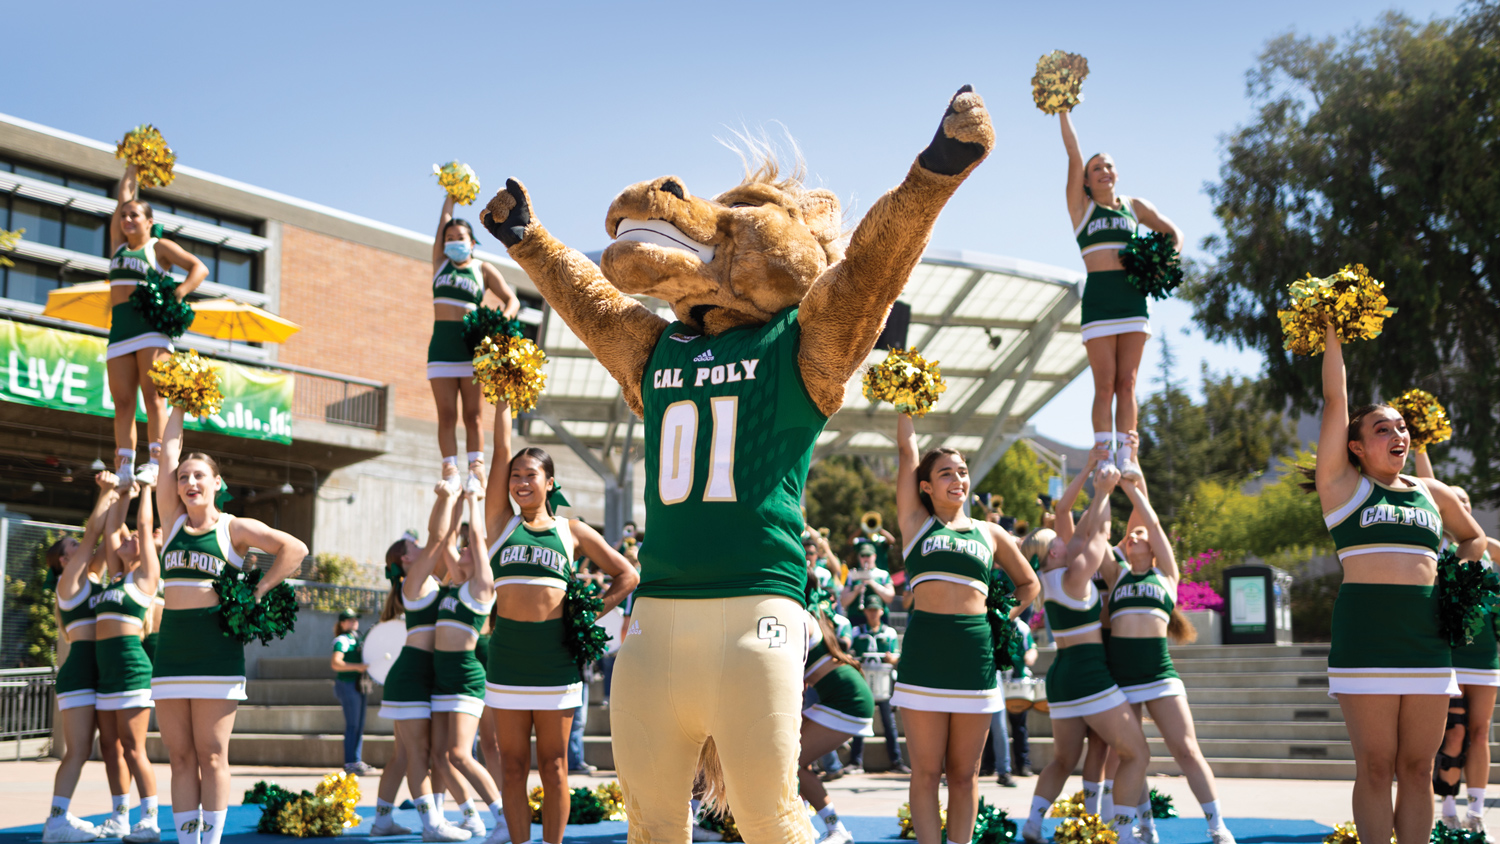 Cheer team members and Musty the mascot perform during a pep rally in the University Union